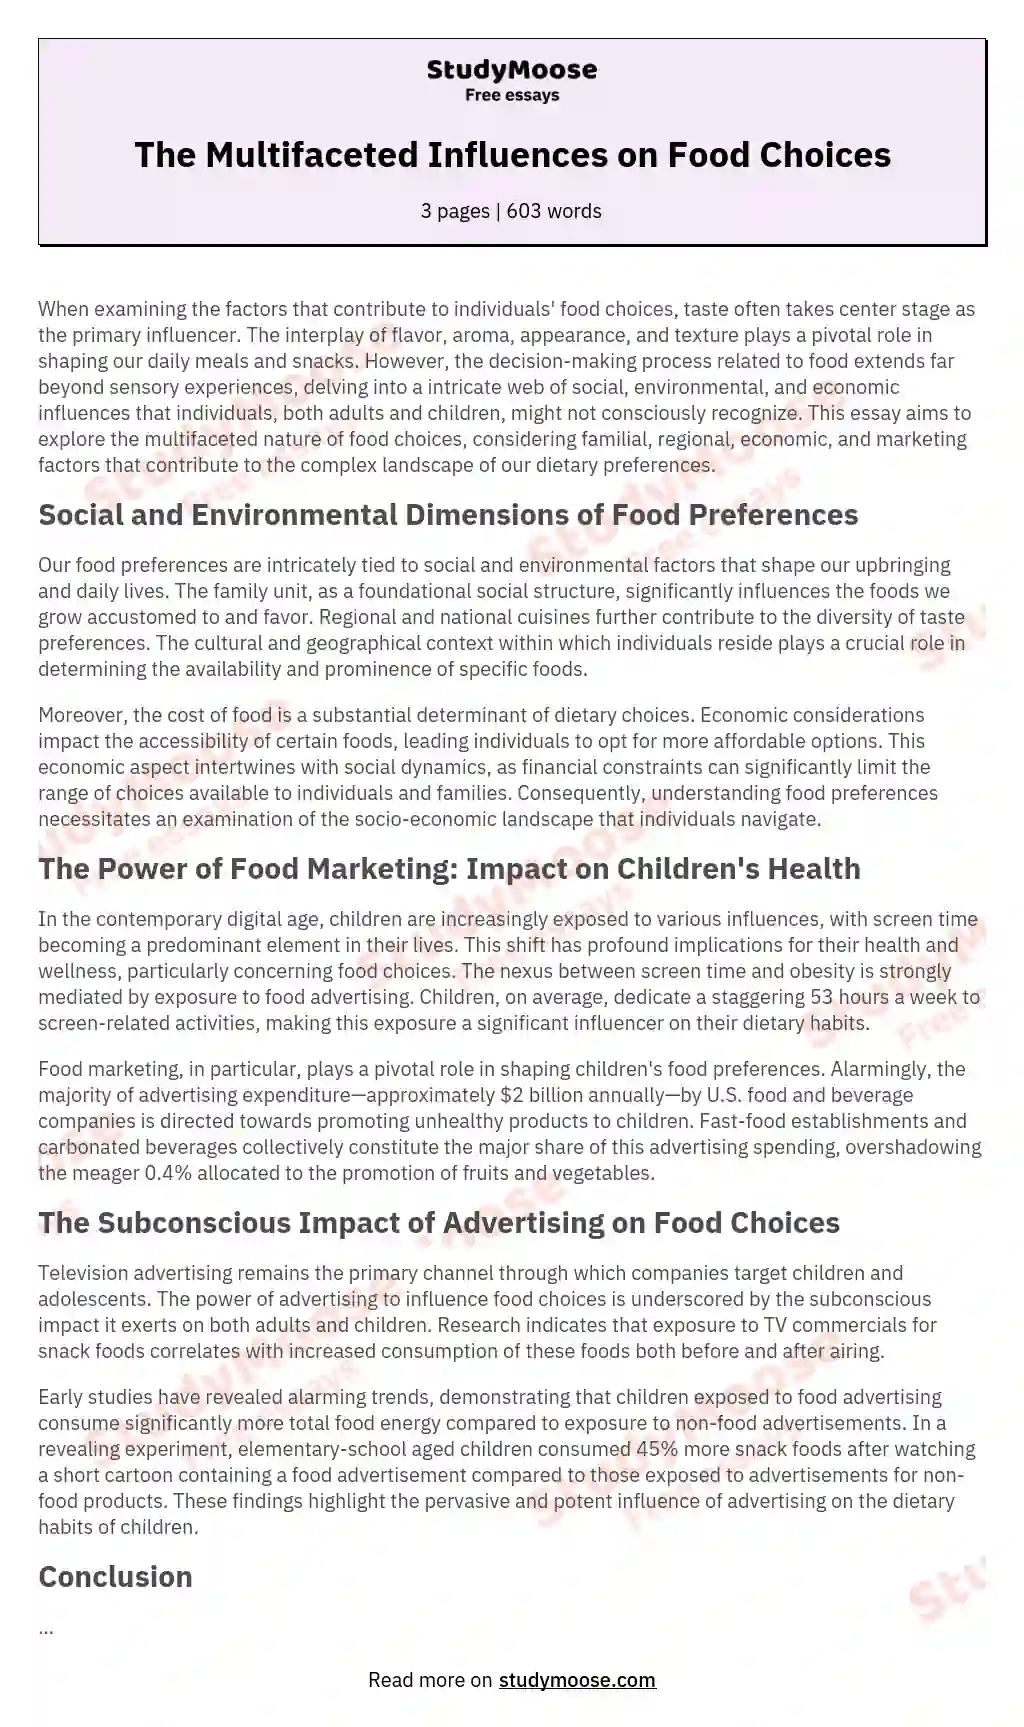 The Multifaceted Influences on Food Choices essay